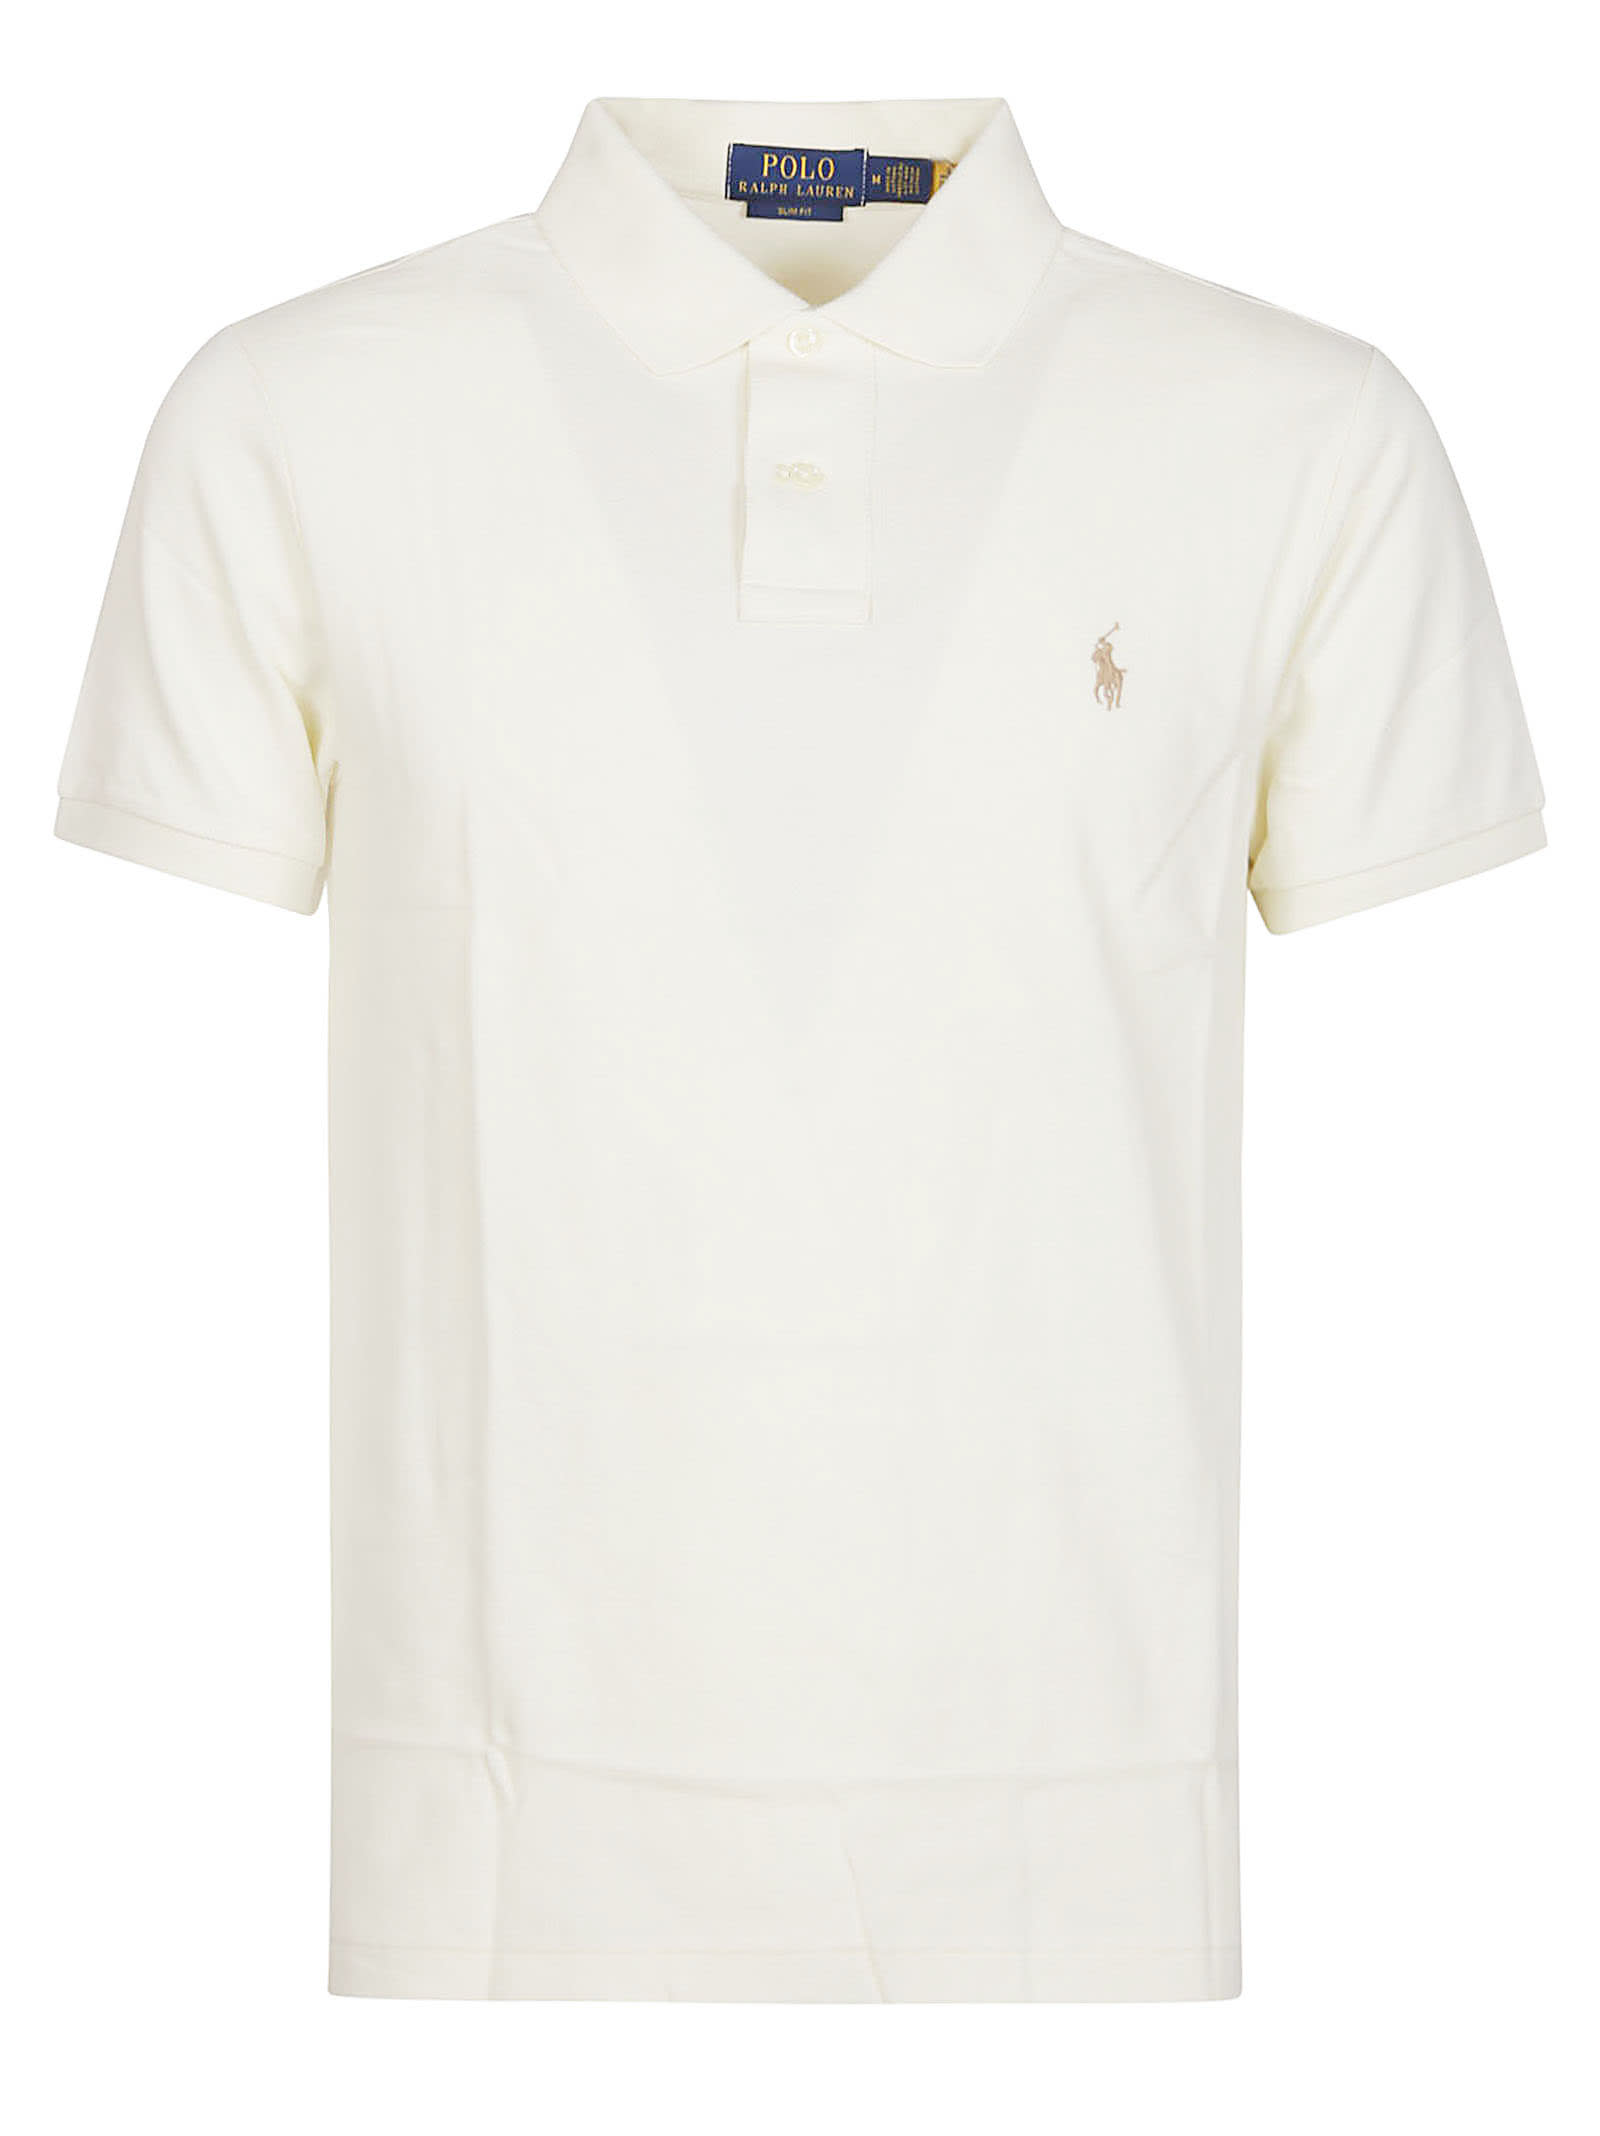 Polo Ralph Lauren Short Sleeve Slim Fit Polo Shirt In Parchment Cream